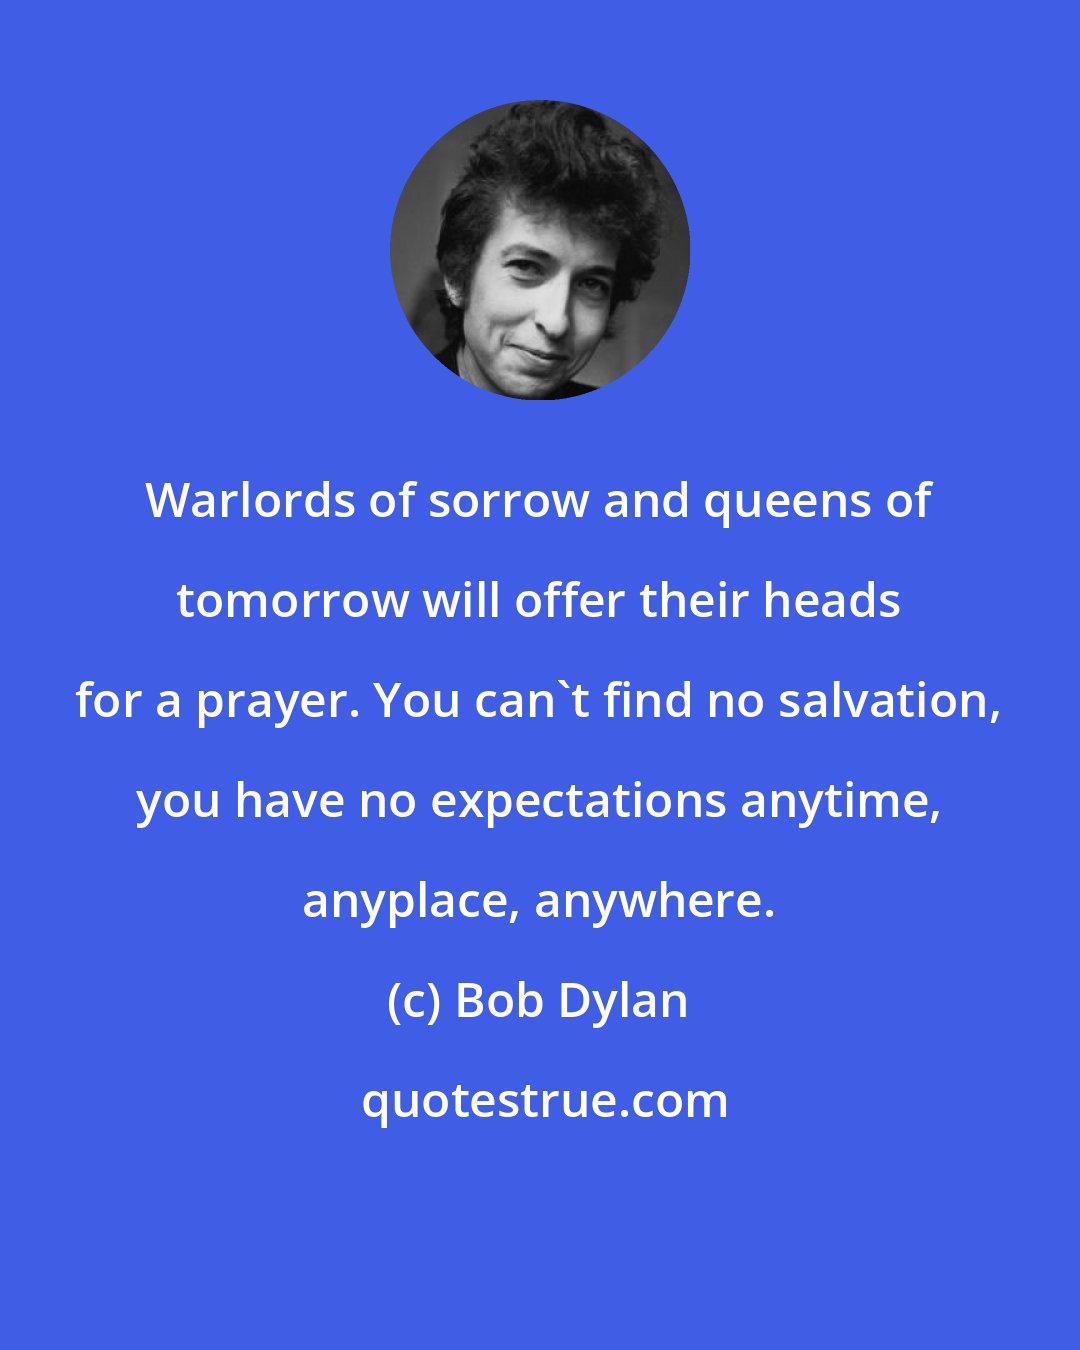 Bob Dylan: Warlords of sorrow and queens of tomorrow will offer their heads for a prayer. You can't find no salvation, you have no expectations anytime, anyplace, anywhere.